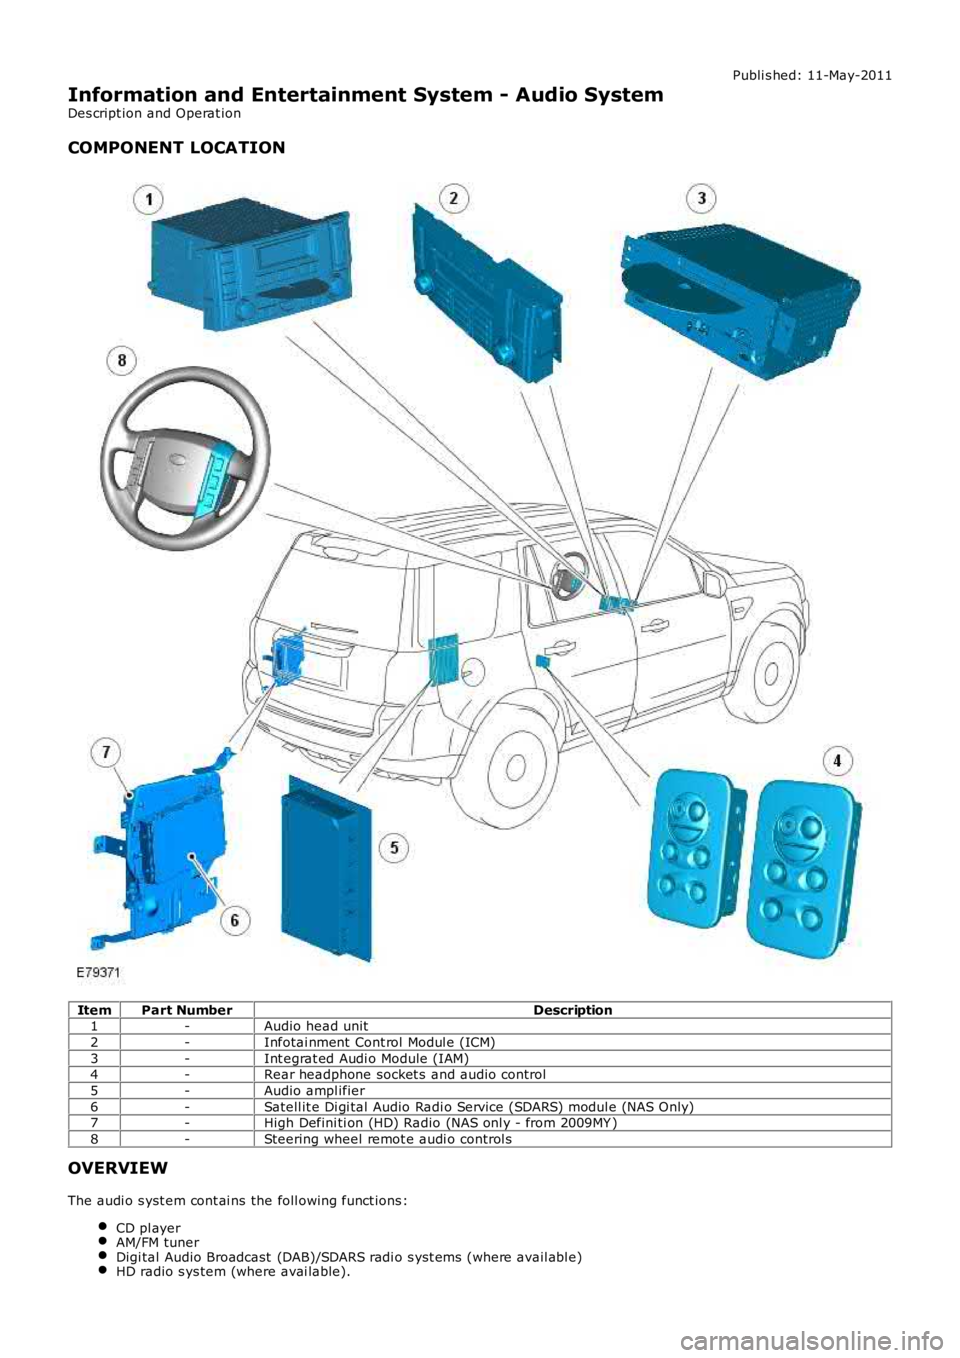 LAND ROVER FRELANDER 2 2006  Repair Manual Publi s hed: 11-May-2011
Information and Entertainment System - Audio System
Des cript ion and Operat ion
COMPONENT LOCATION
ItemPart NumberDescription1-Audio head unit
2-Infotai nment  Cont rol Modul